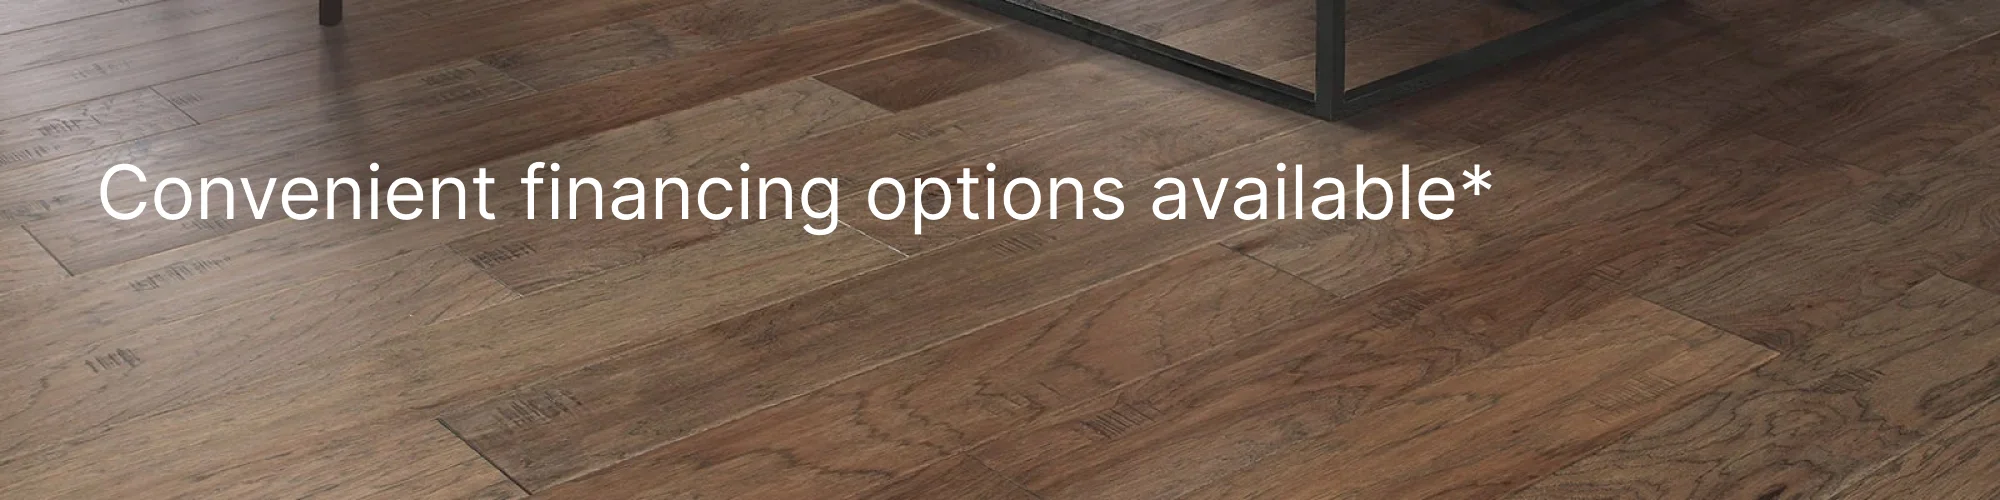 Special financing options available with Chisum's Floor Covering in Ojai, CA